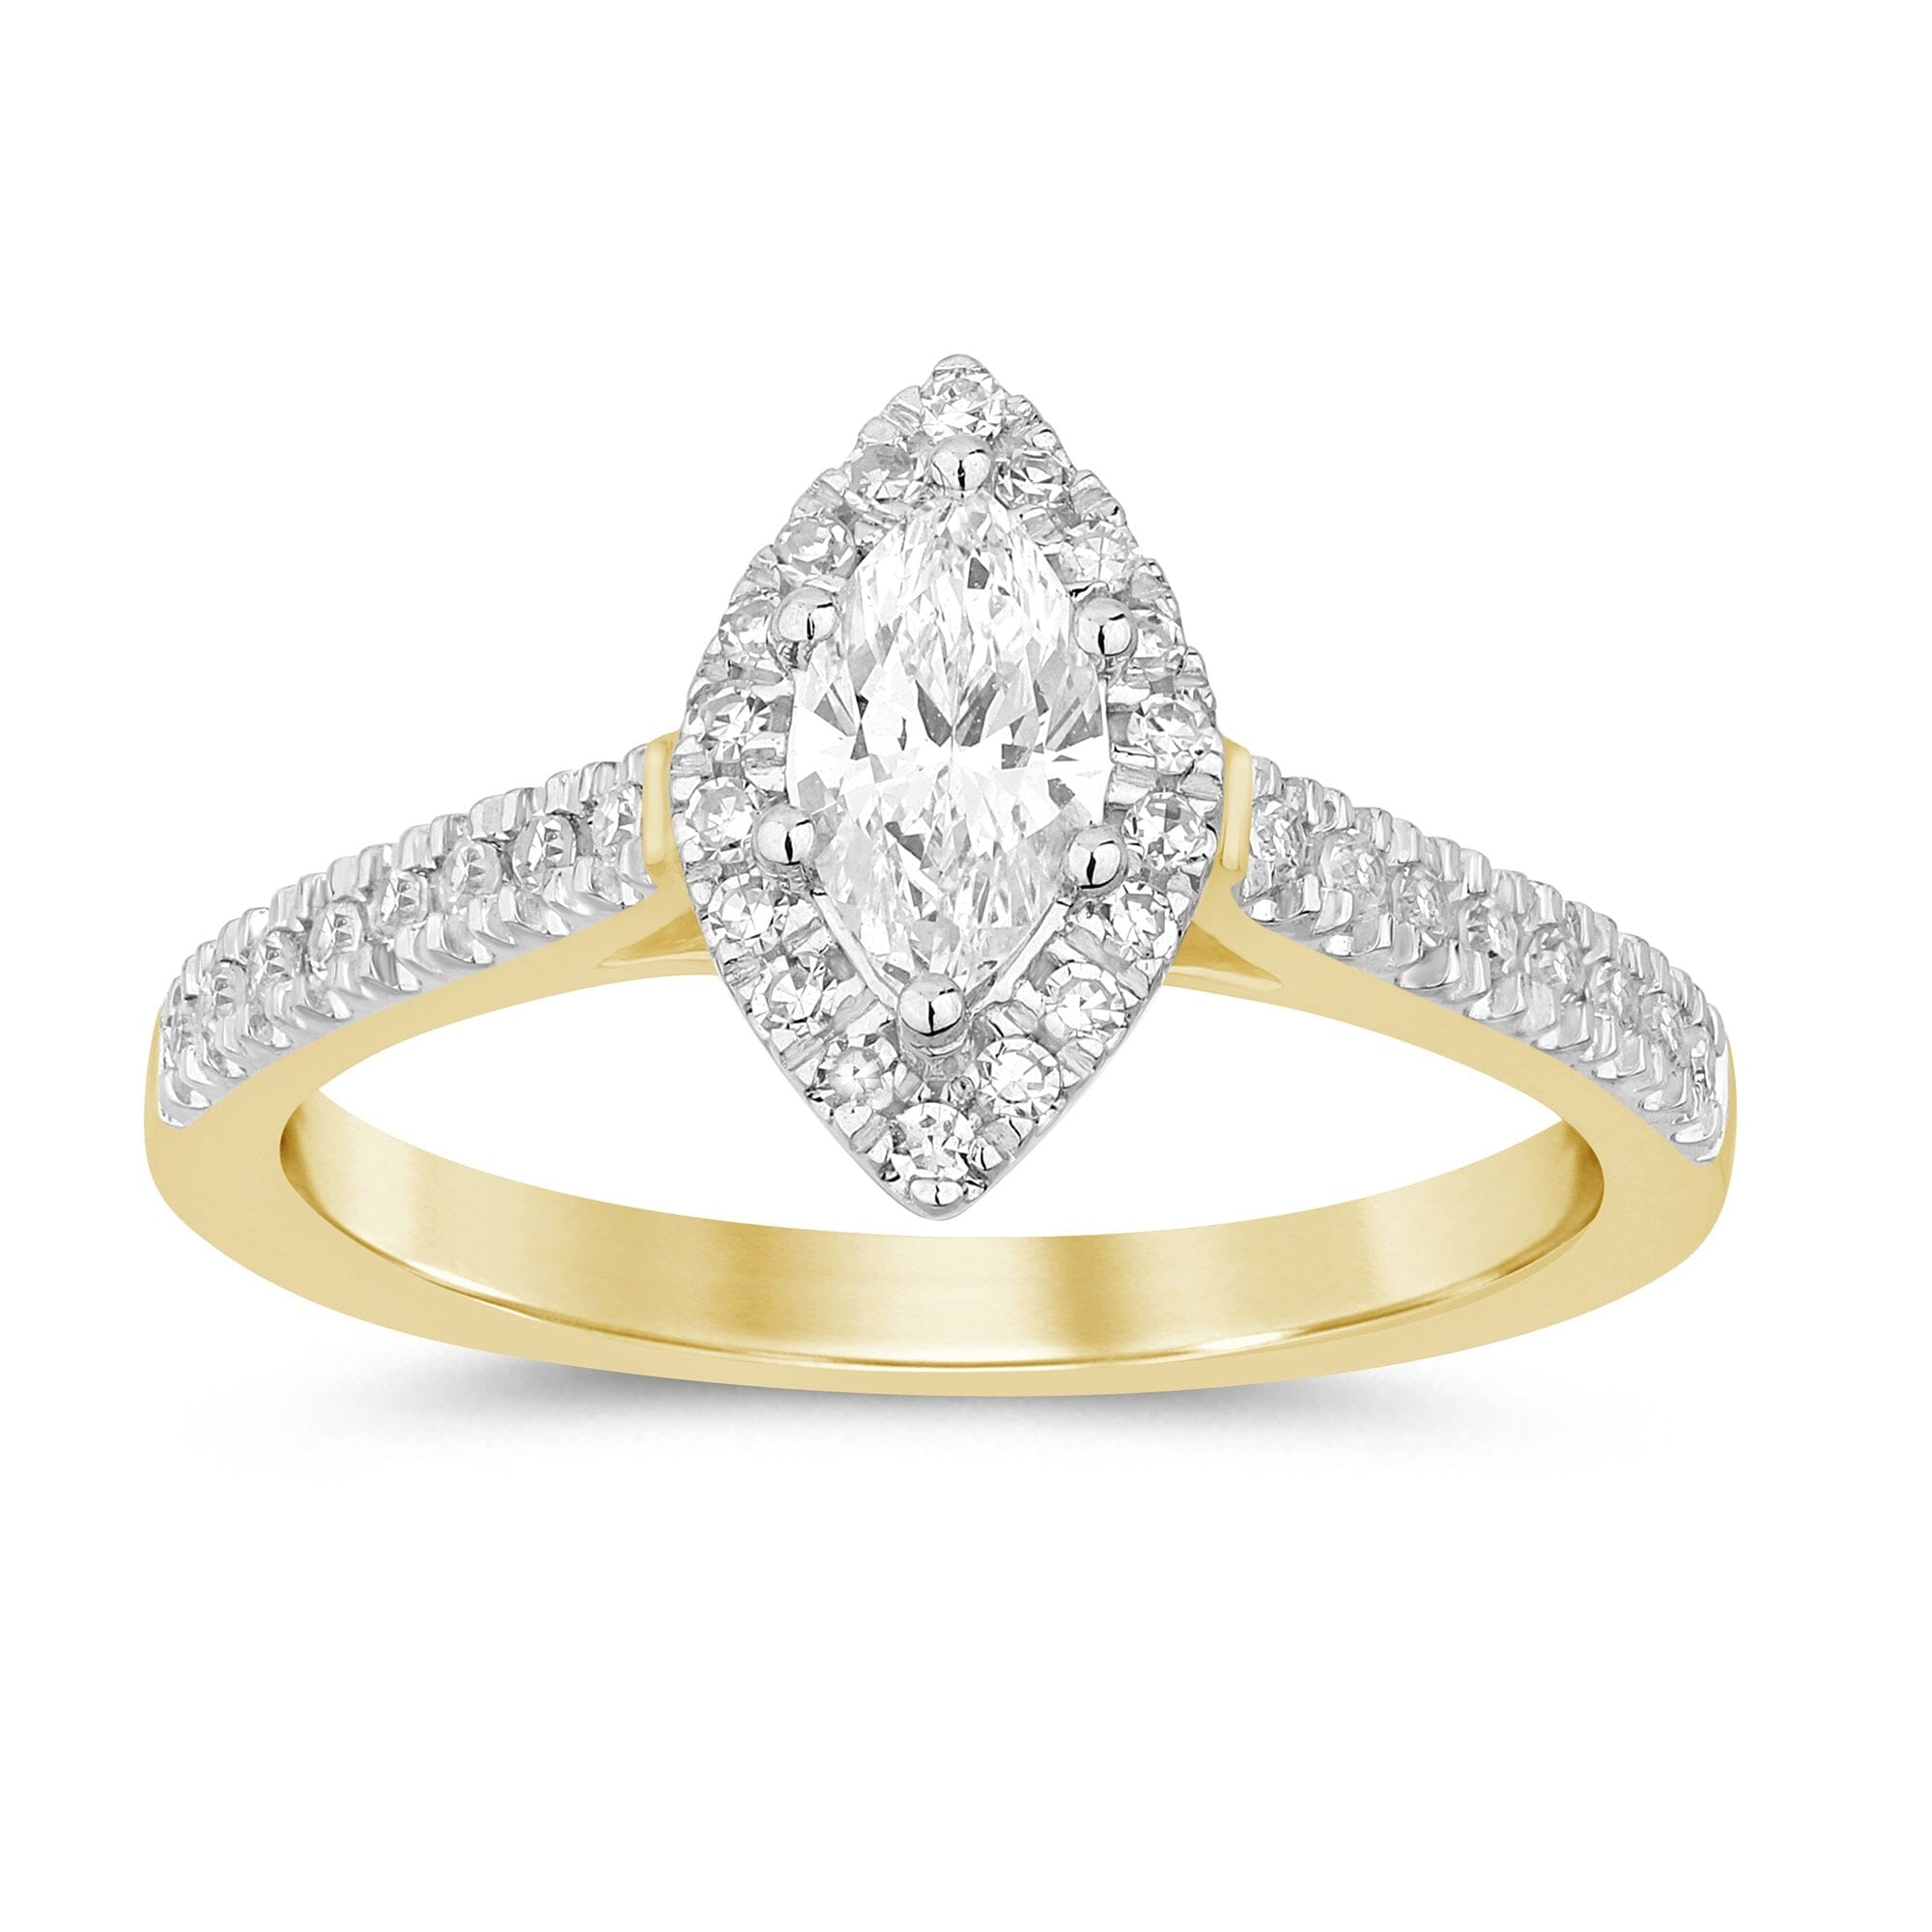 Meera Solitaire Ring with 0.60ct of Laboratory Grown Diamonds in 9ct Yellow Gold Rings Bevilles 